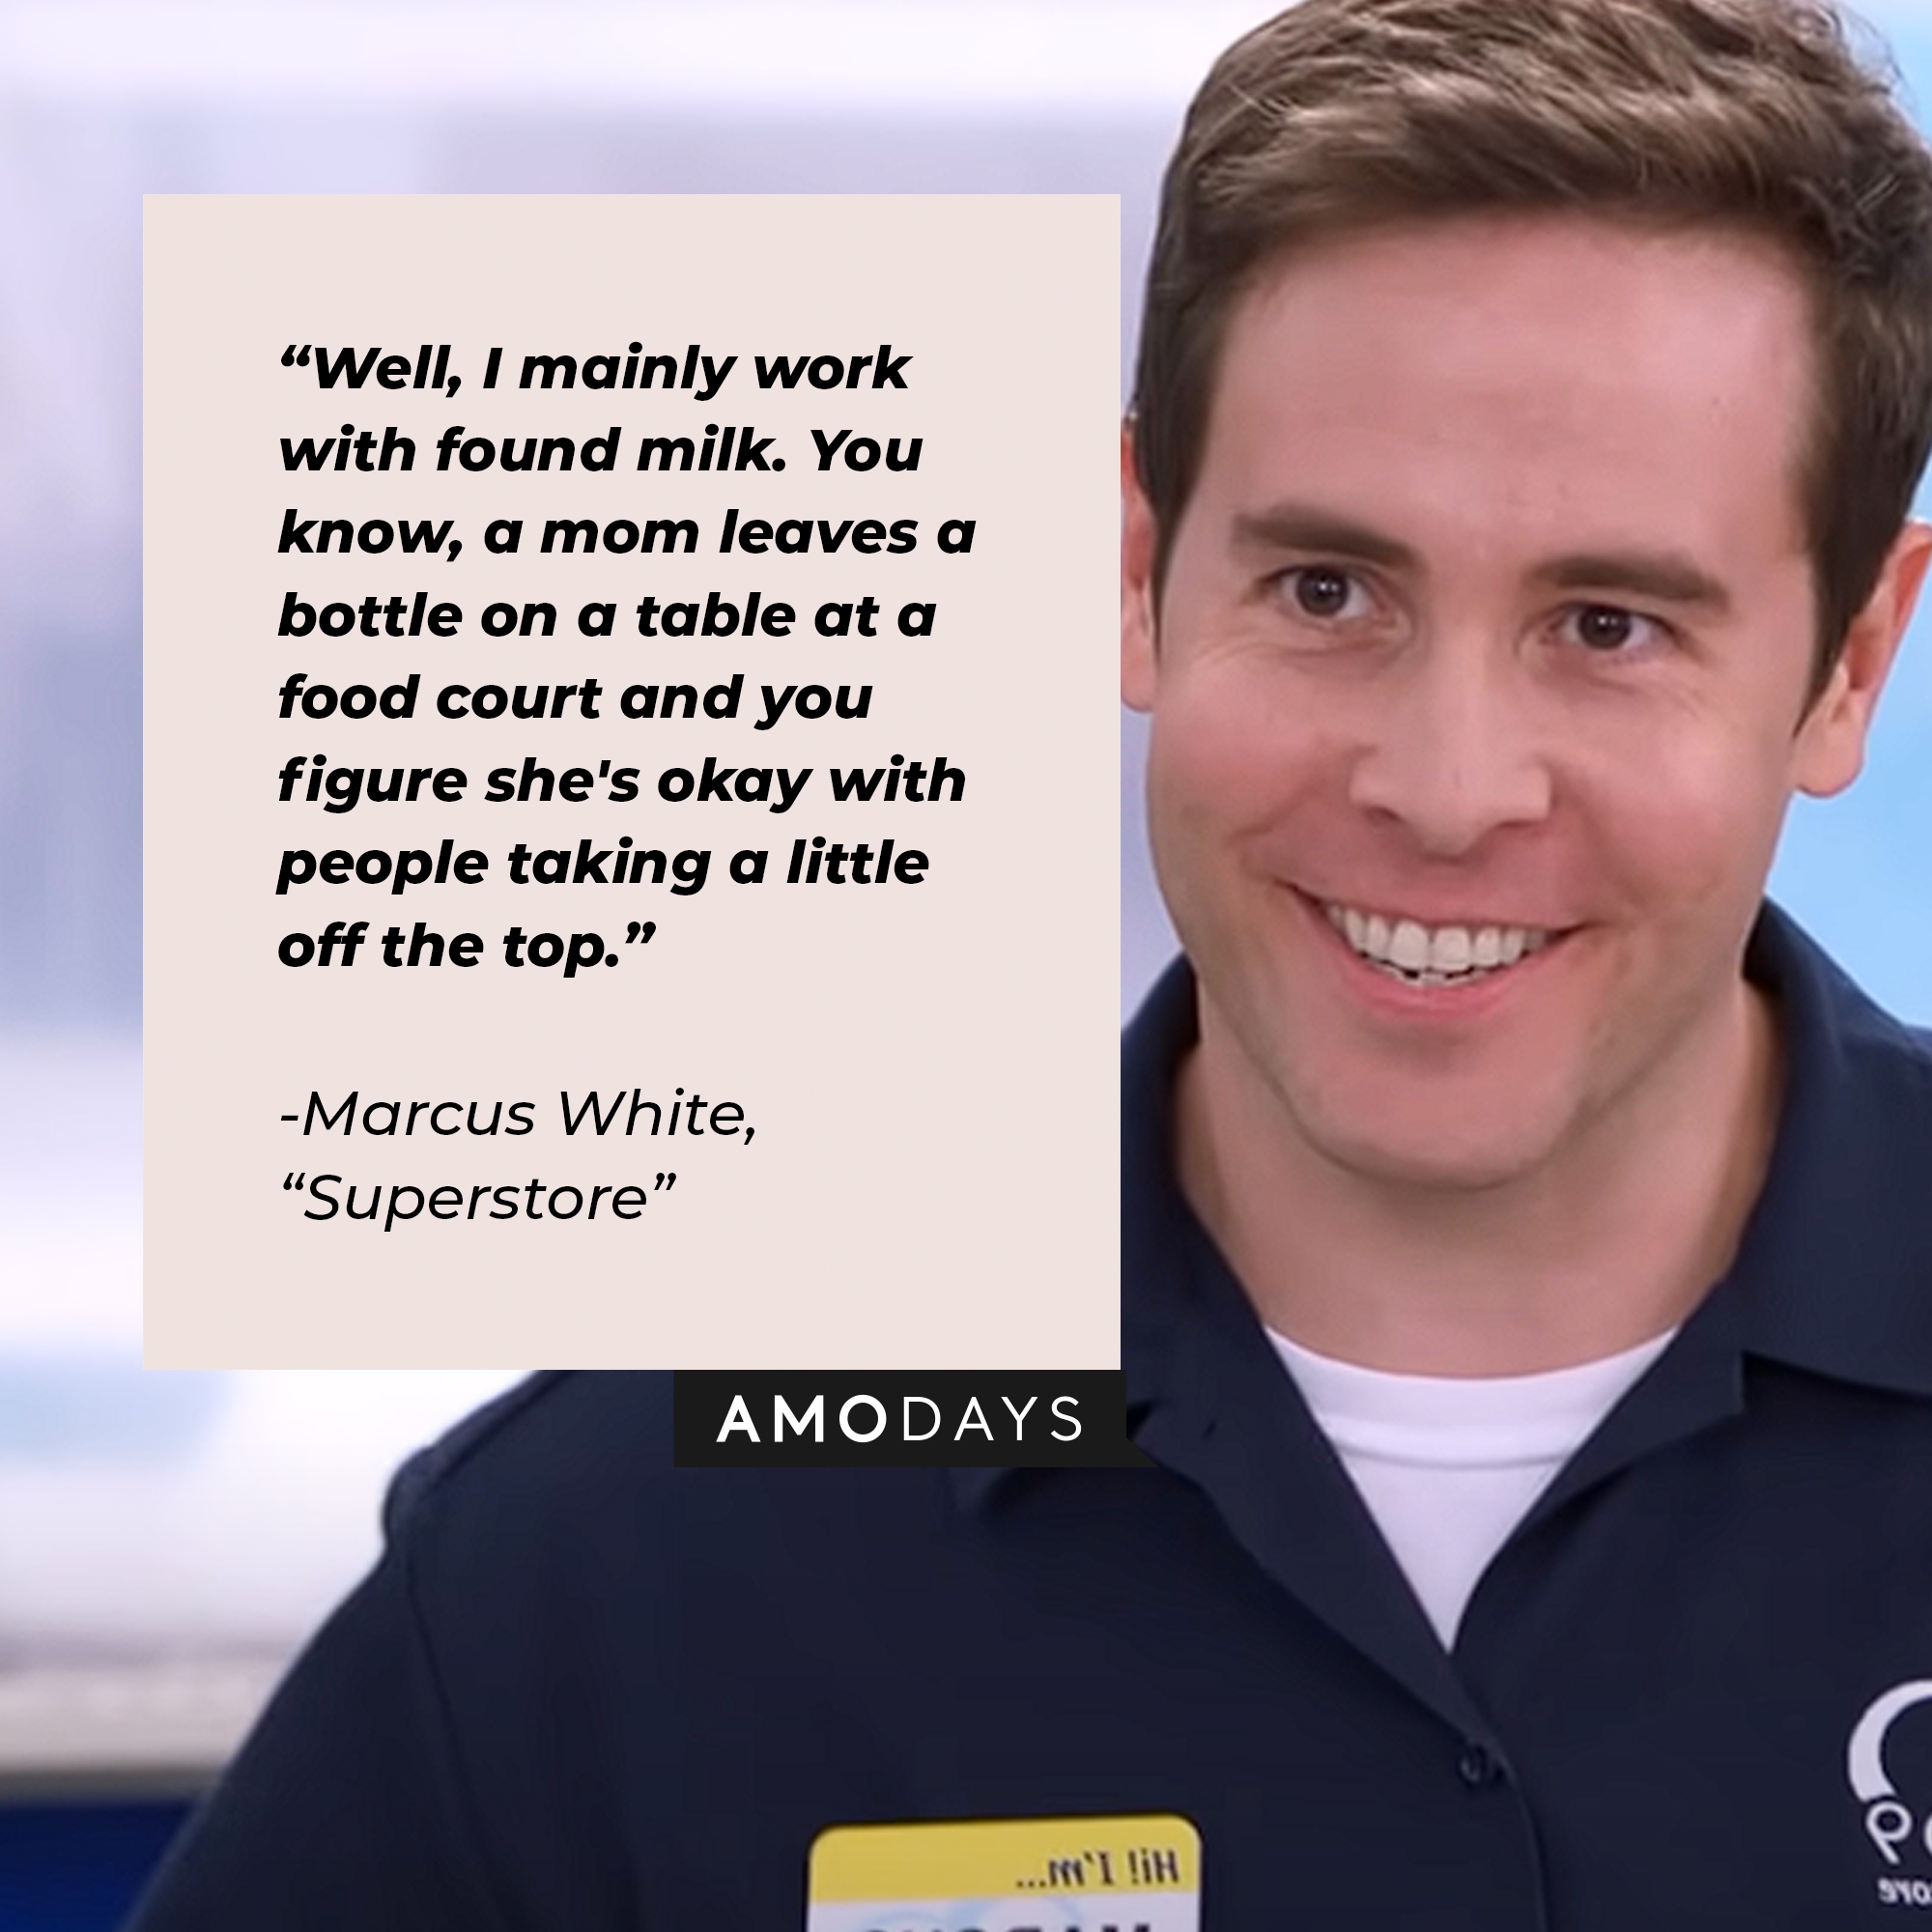 Image of  Marcus White with the quote: “Well, I mainly work with found milk. You know, a mom leaves a bottle on a table at a food court and you figure she's okay with people taking a little off the top.” | Source: Youtube.com/NBCSuperstore